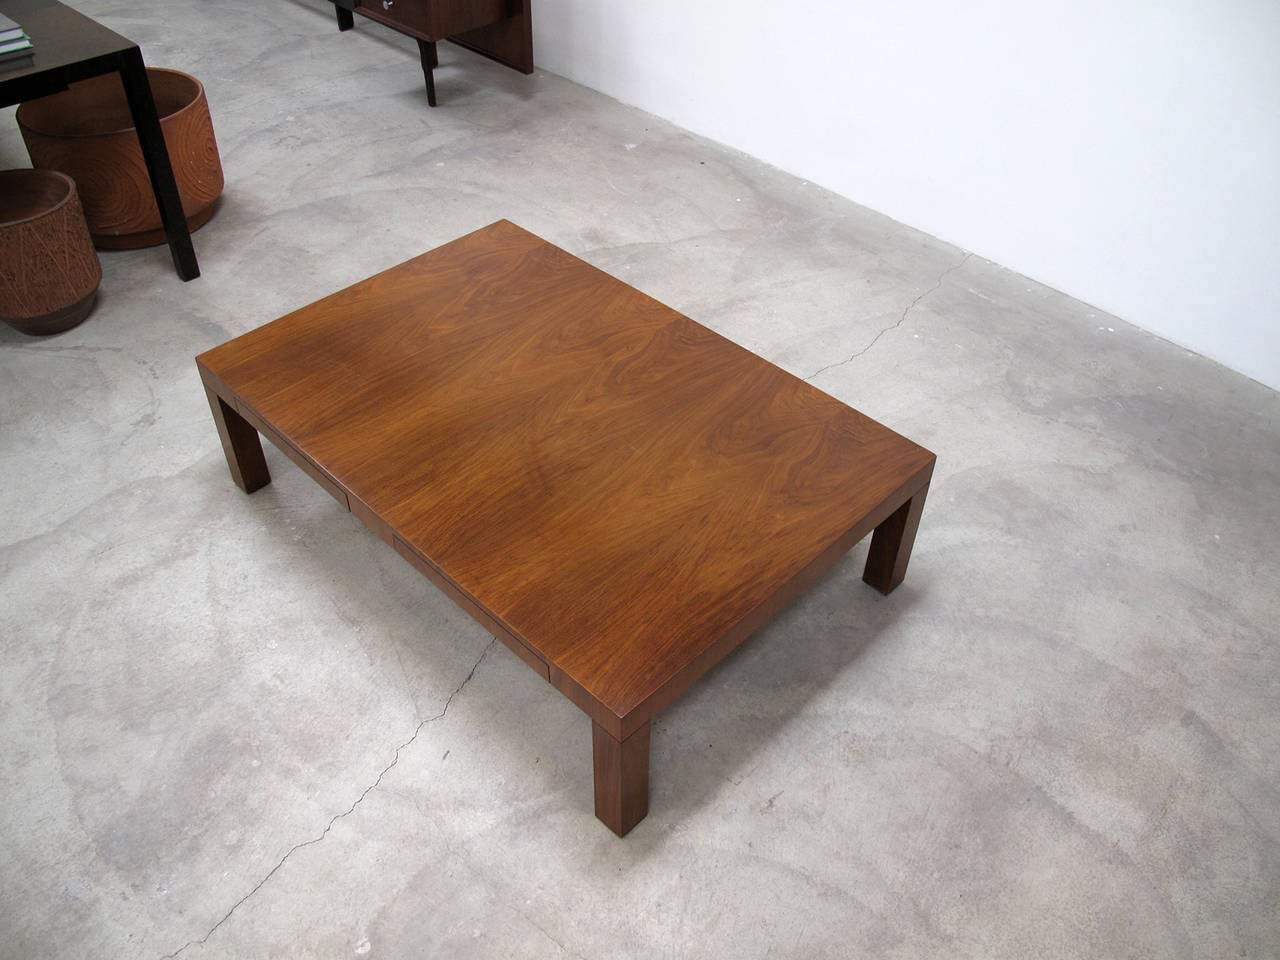 Milo Baughman Burl Wood Parsons Style Coffee Table, 1960s For Sale 1